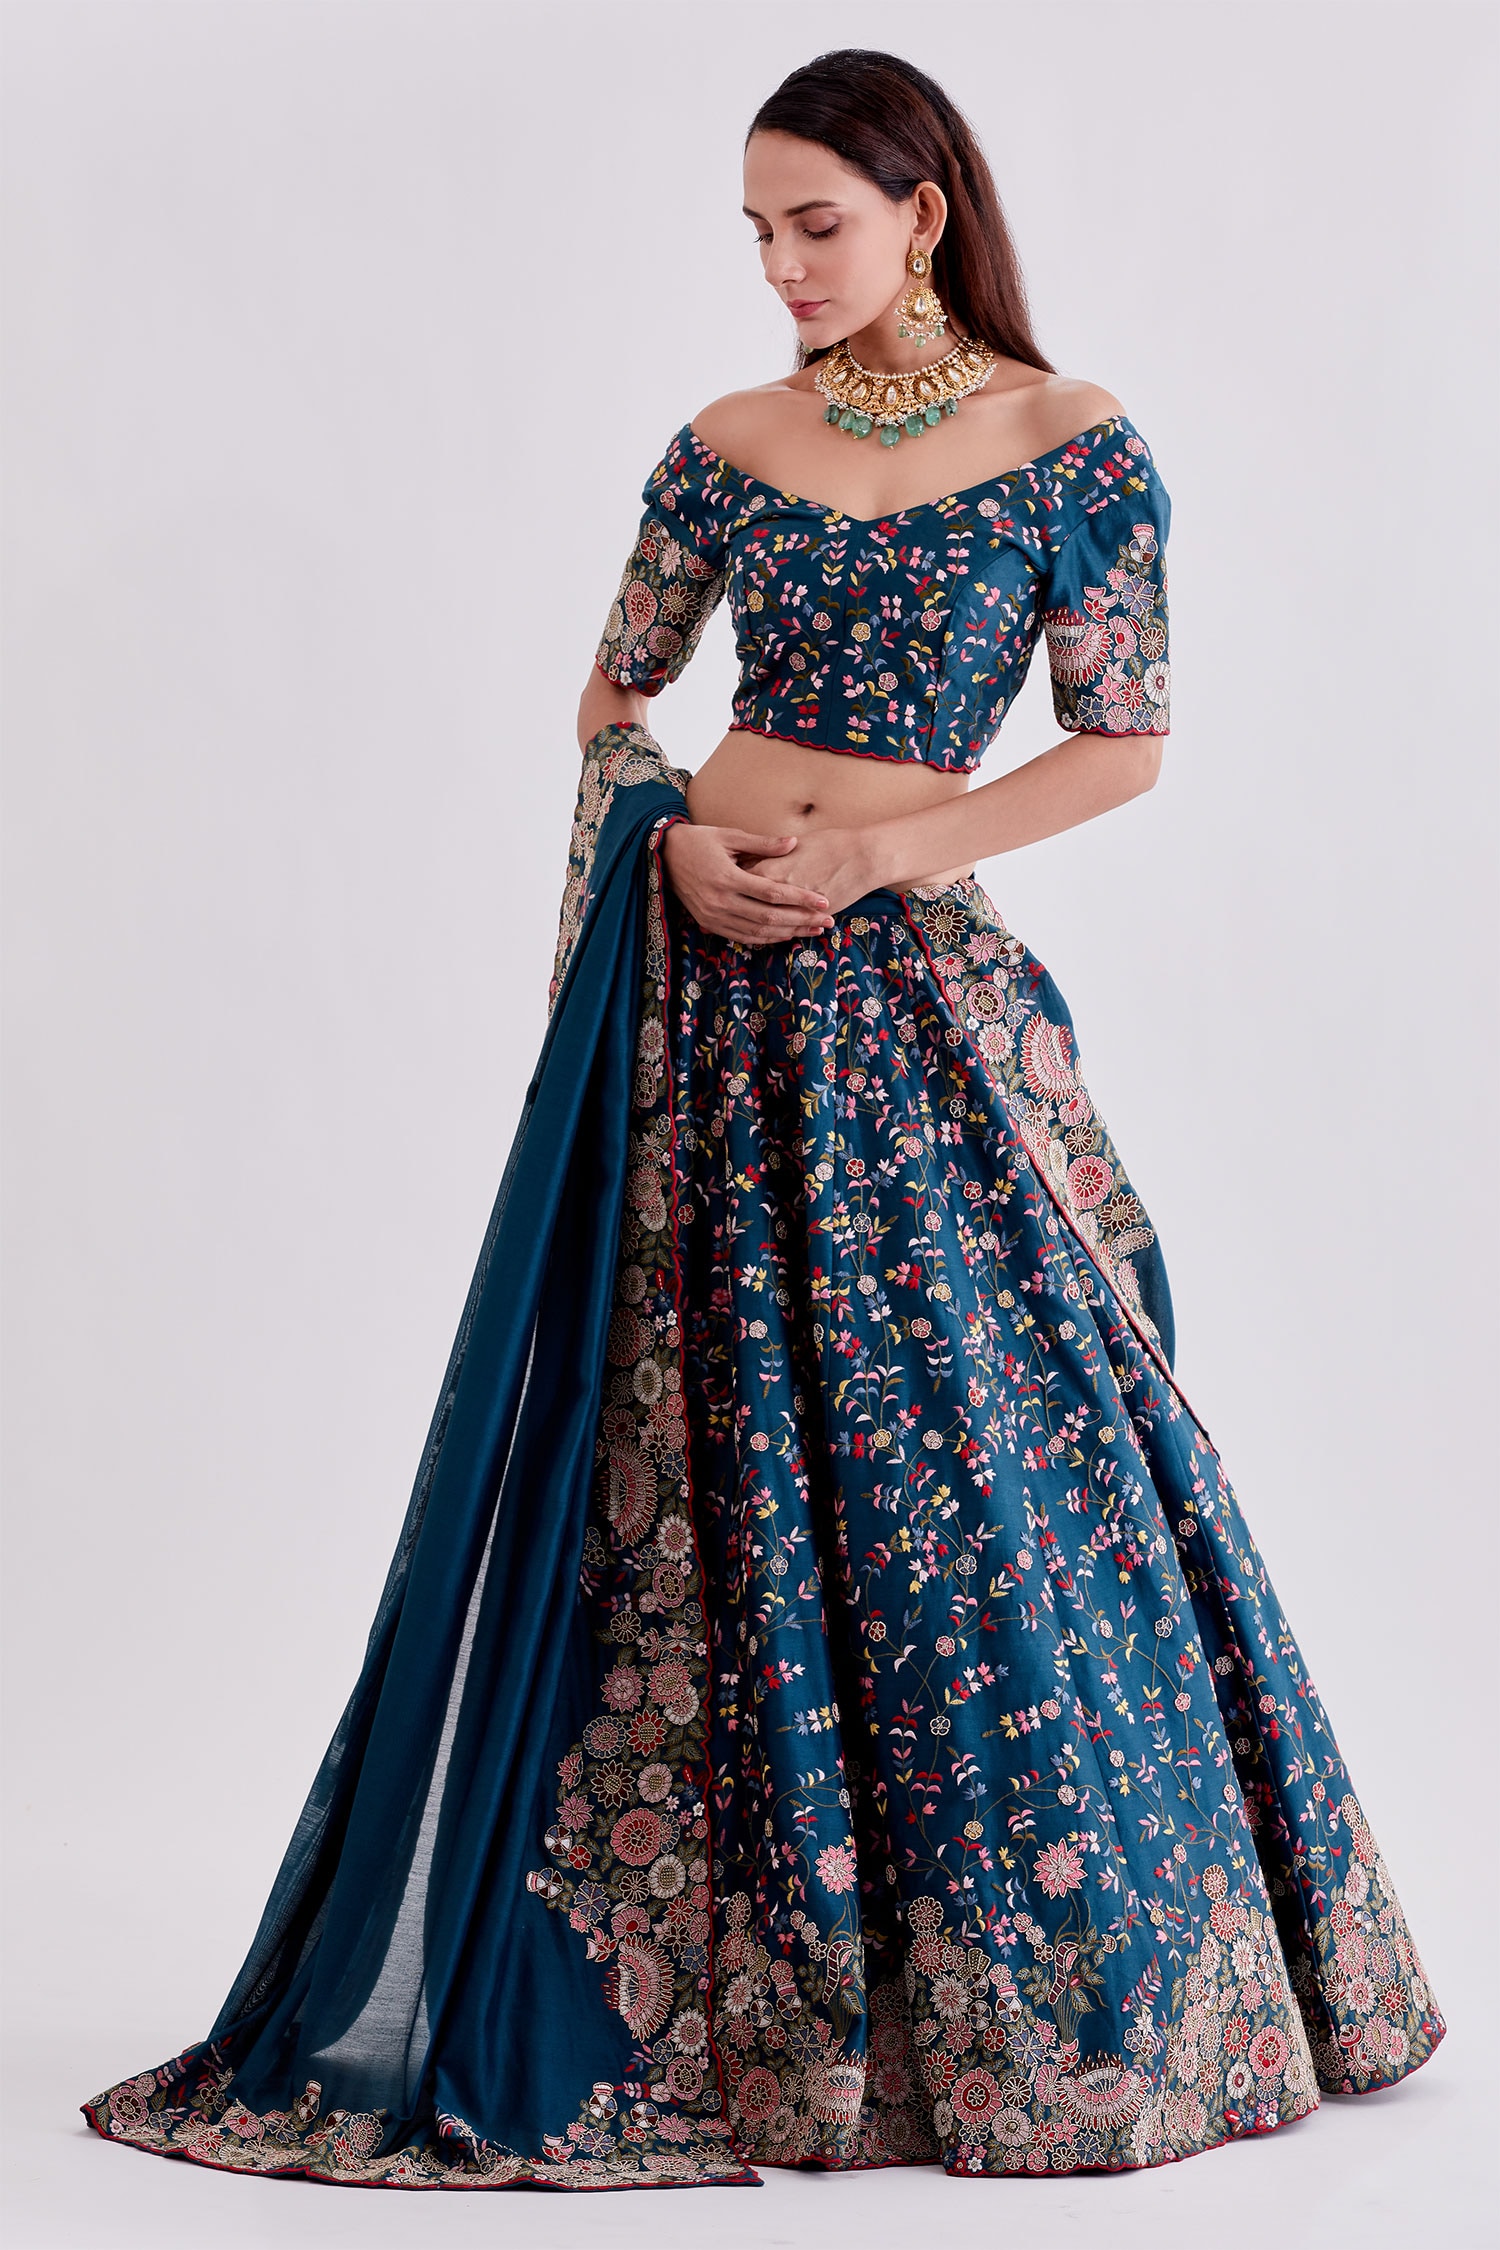 What is the best party wear lehenga online store in India? - Quora